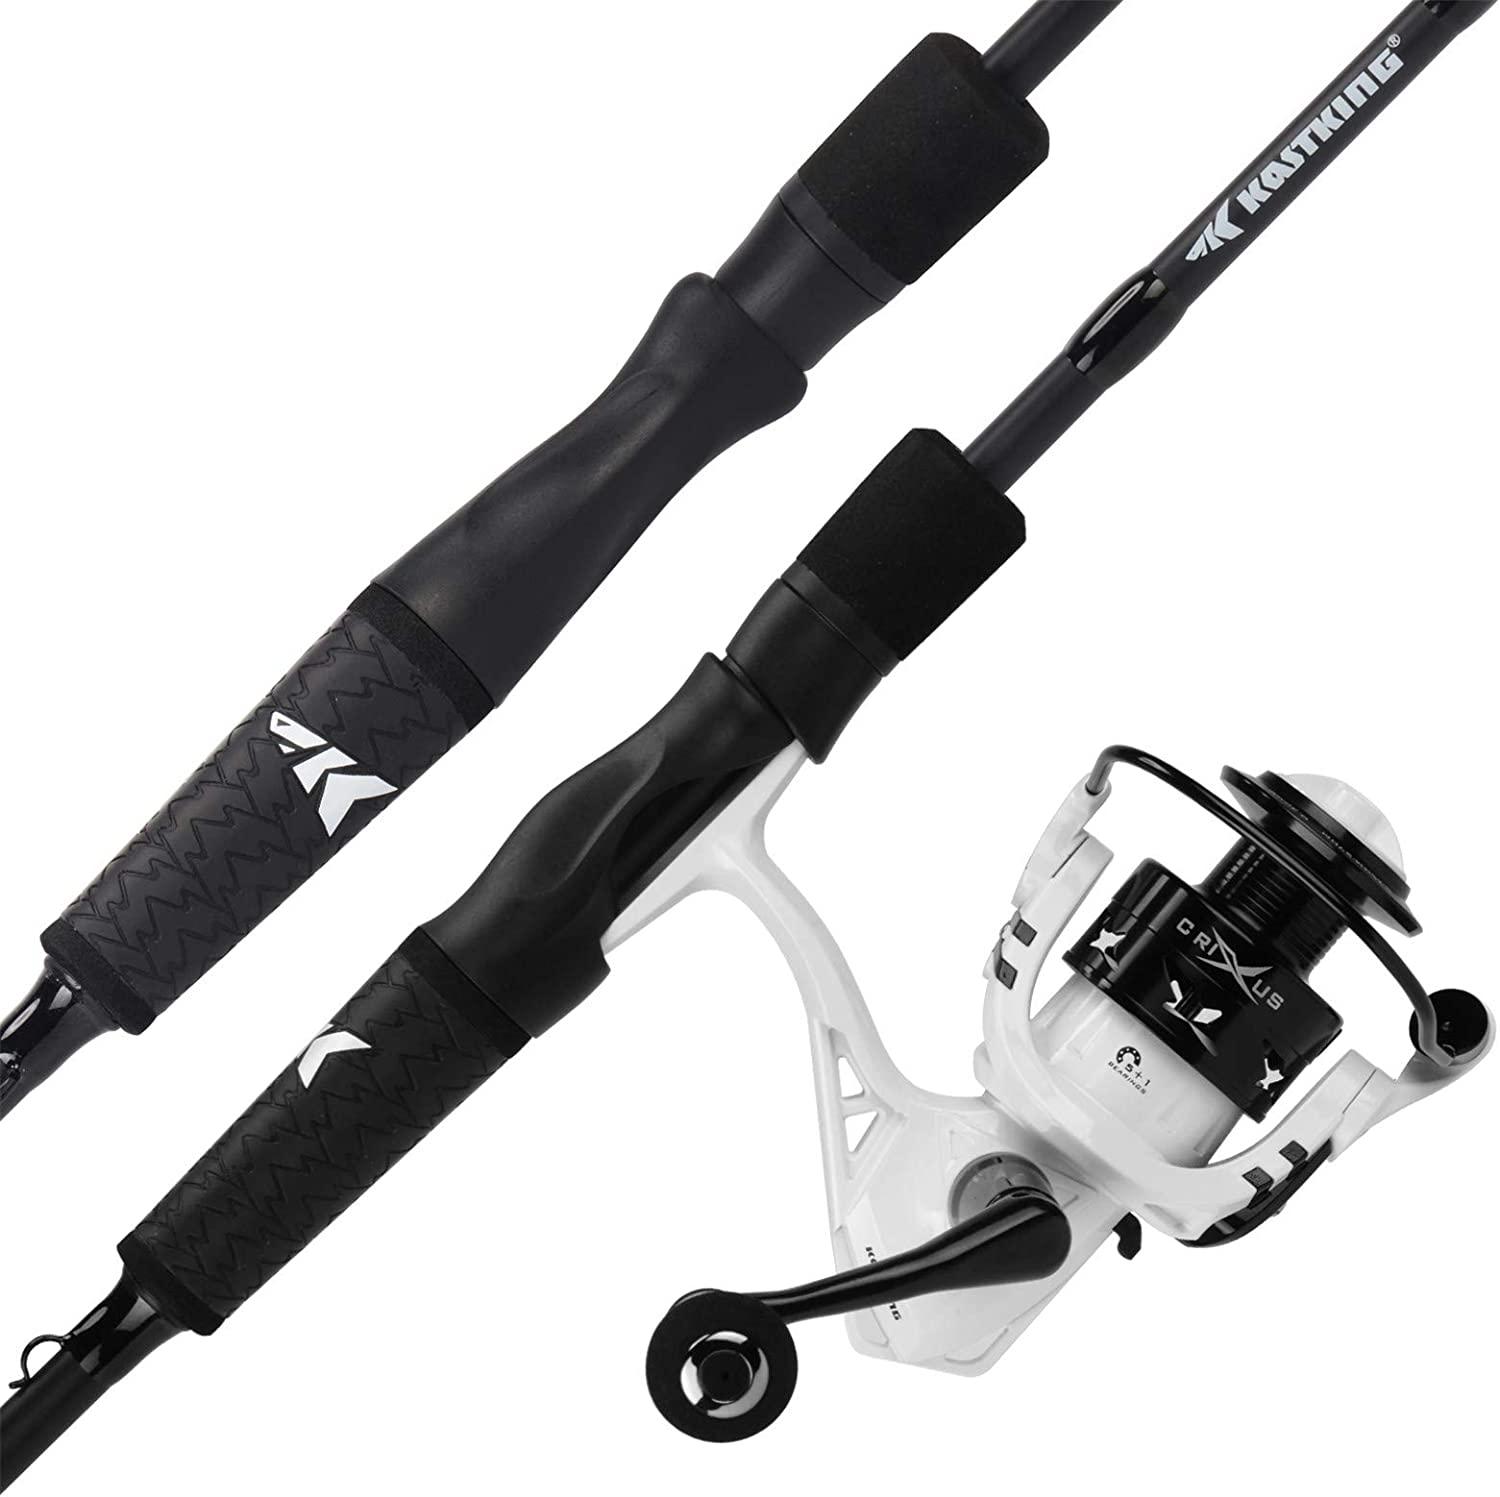 KastKing Casting Rods, Powerful S-Curve Graphite Rod Blanks - Kong Fishing Rods